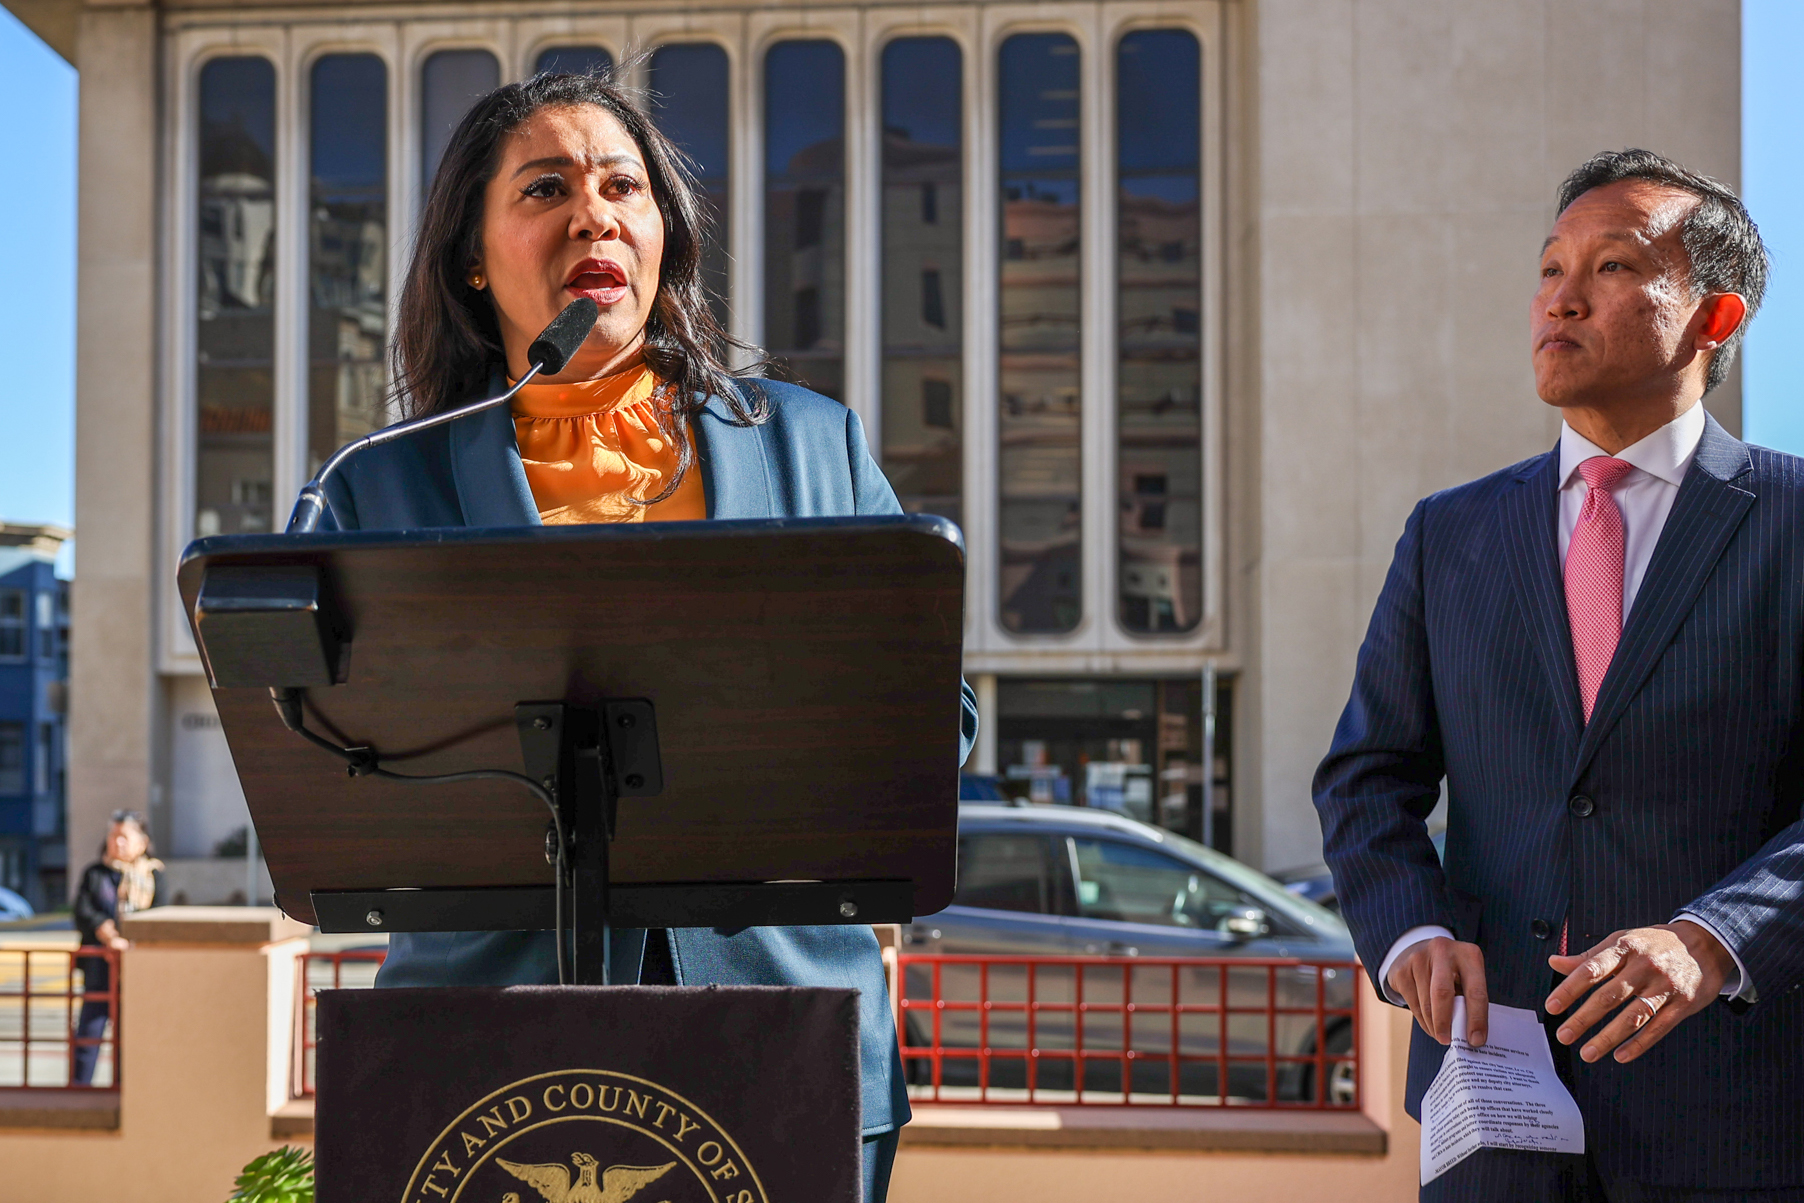 San Francisco Mayor To Fund ‘Wellness Hubs’ for Overdose Prevention in Upcoming Budget